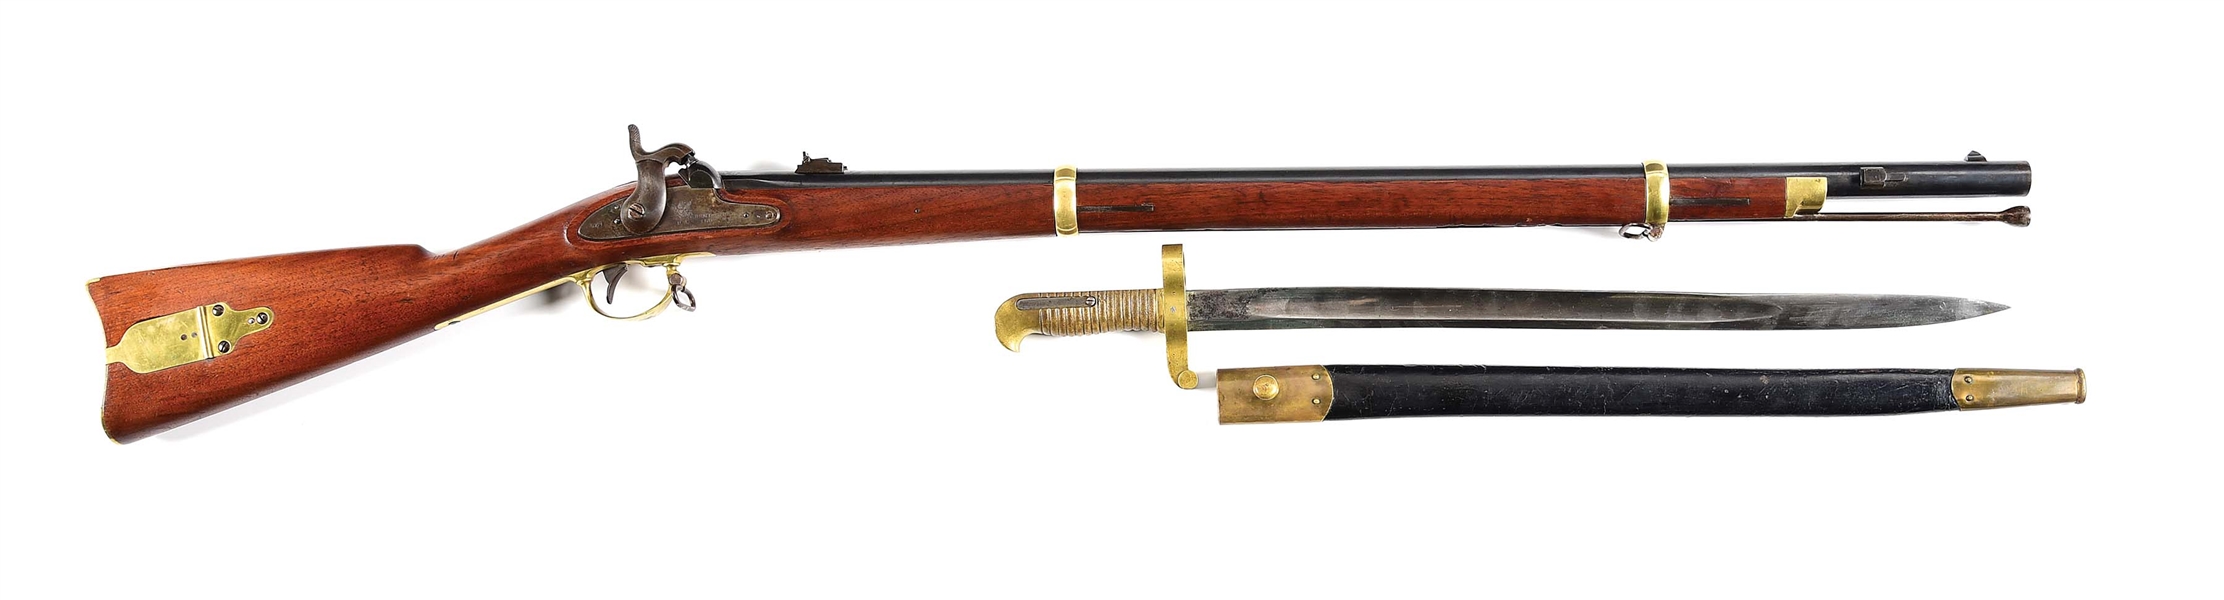 (A) REMINGTON 1862 ZOUAVE PERCUSSION MUSKET WITH BAYONET.  